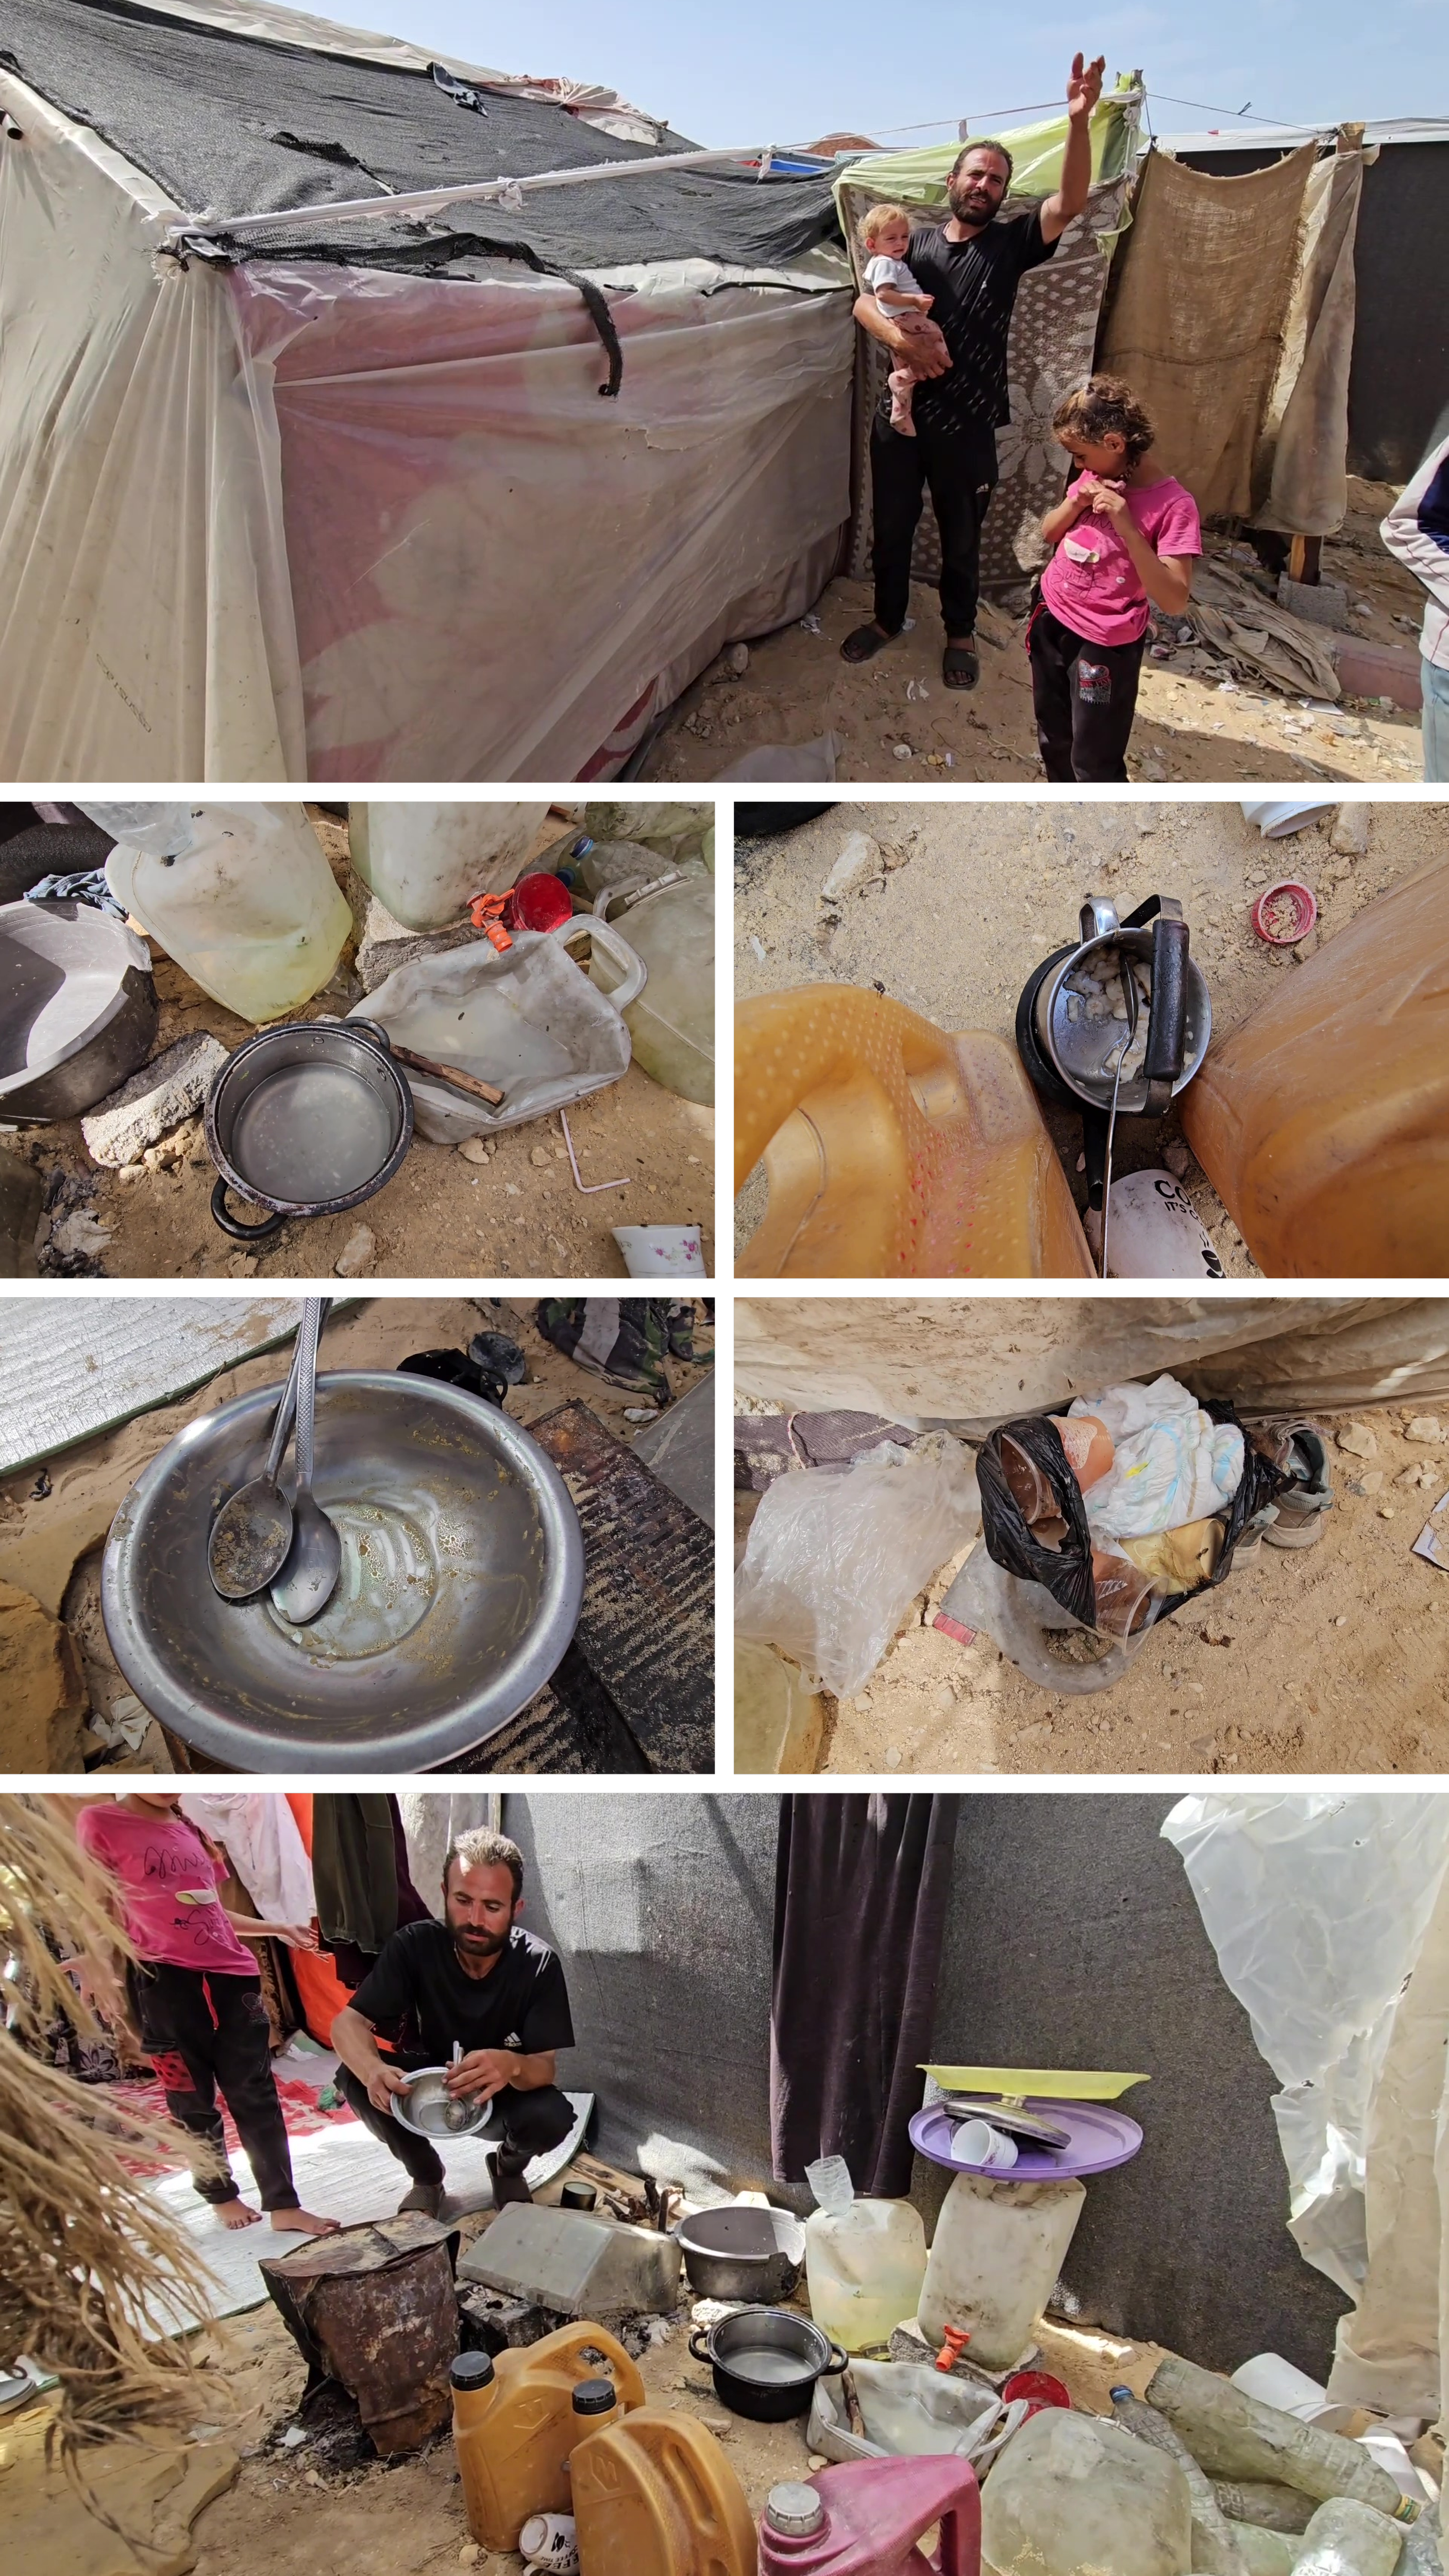 A grid of photos showing dirty dishes and trash inside a tent